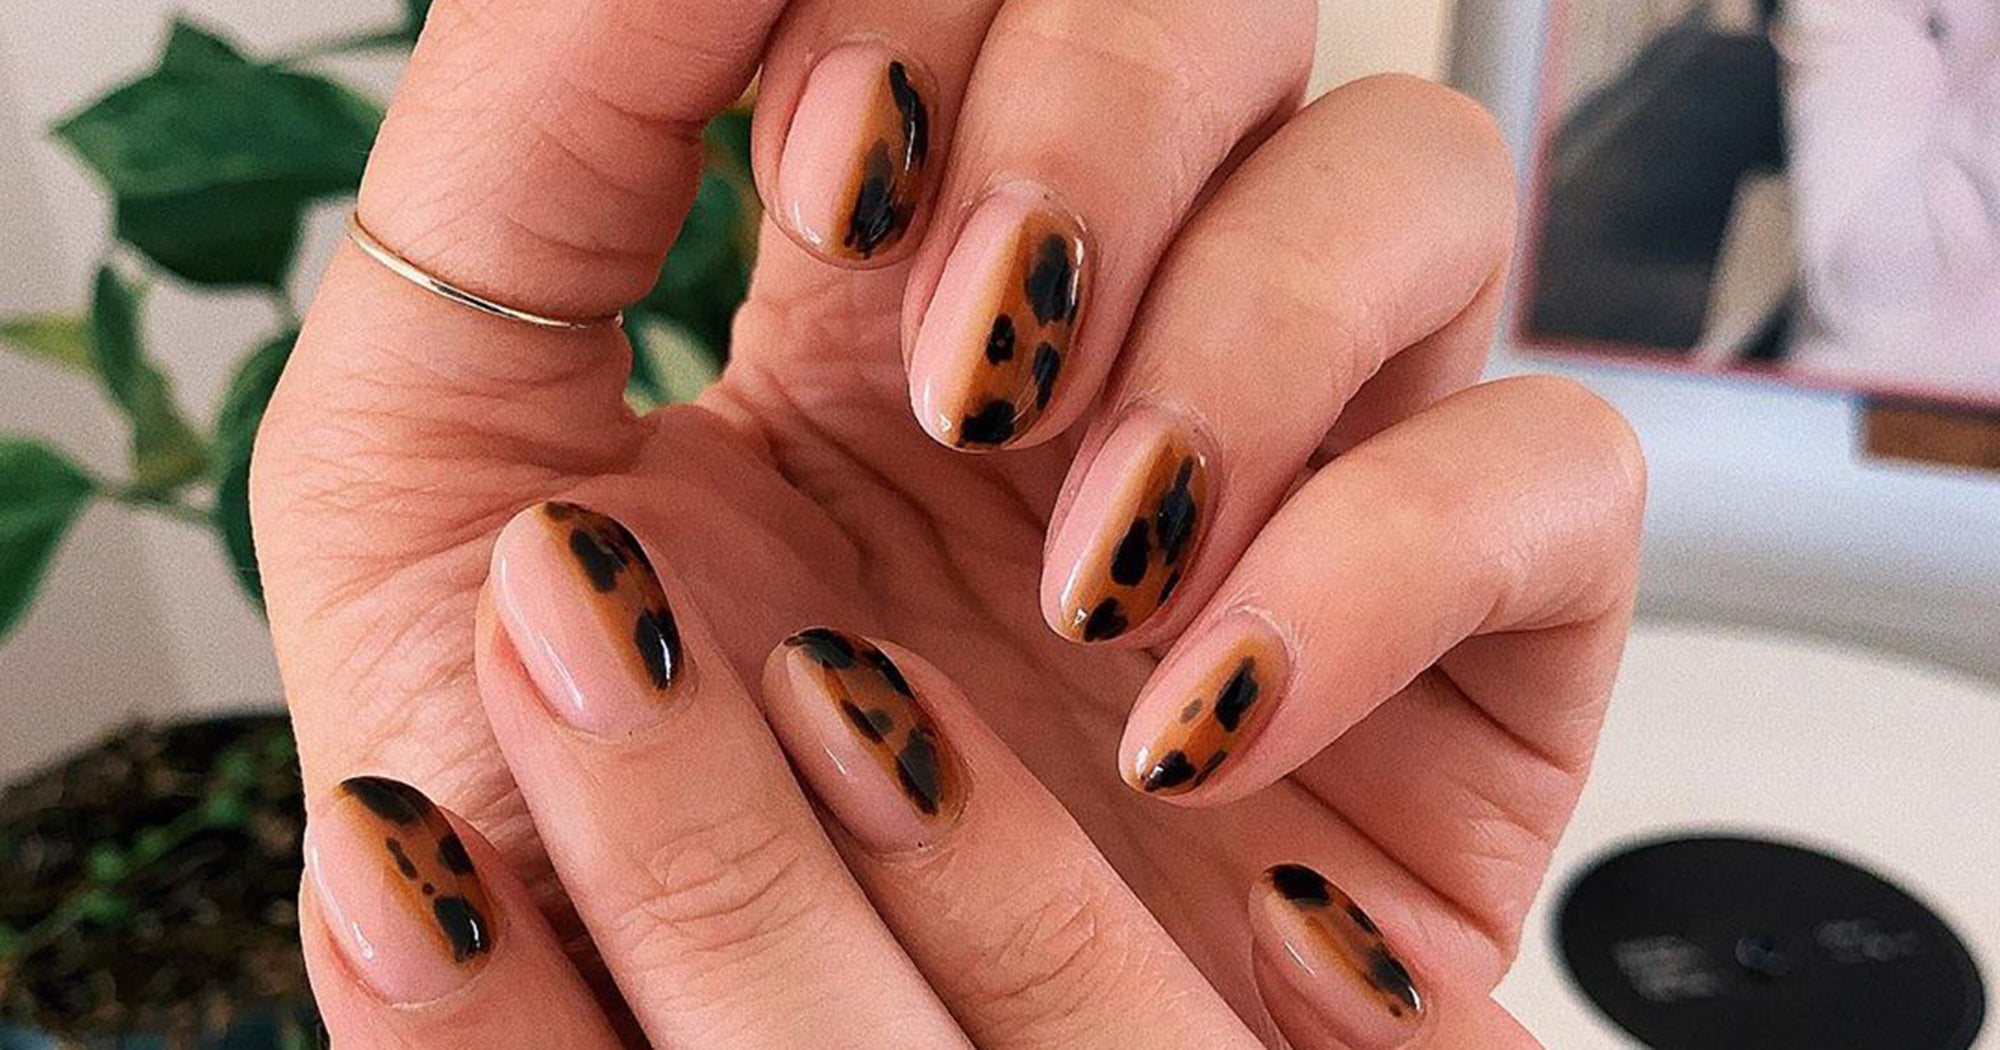 10. Tortoise Shell Nail Art with Foil - wide 1